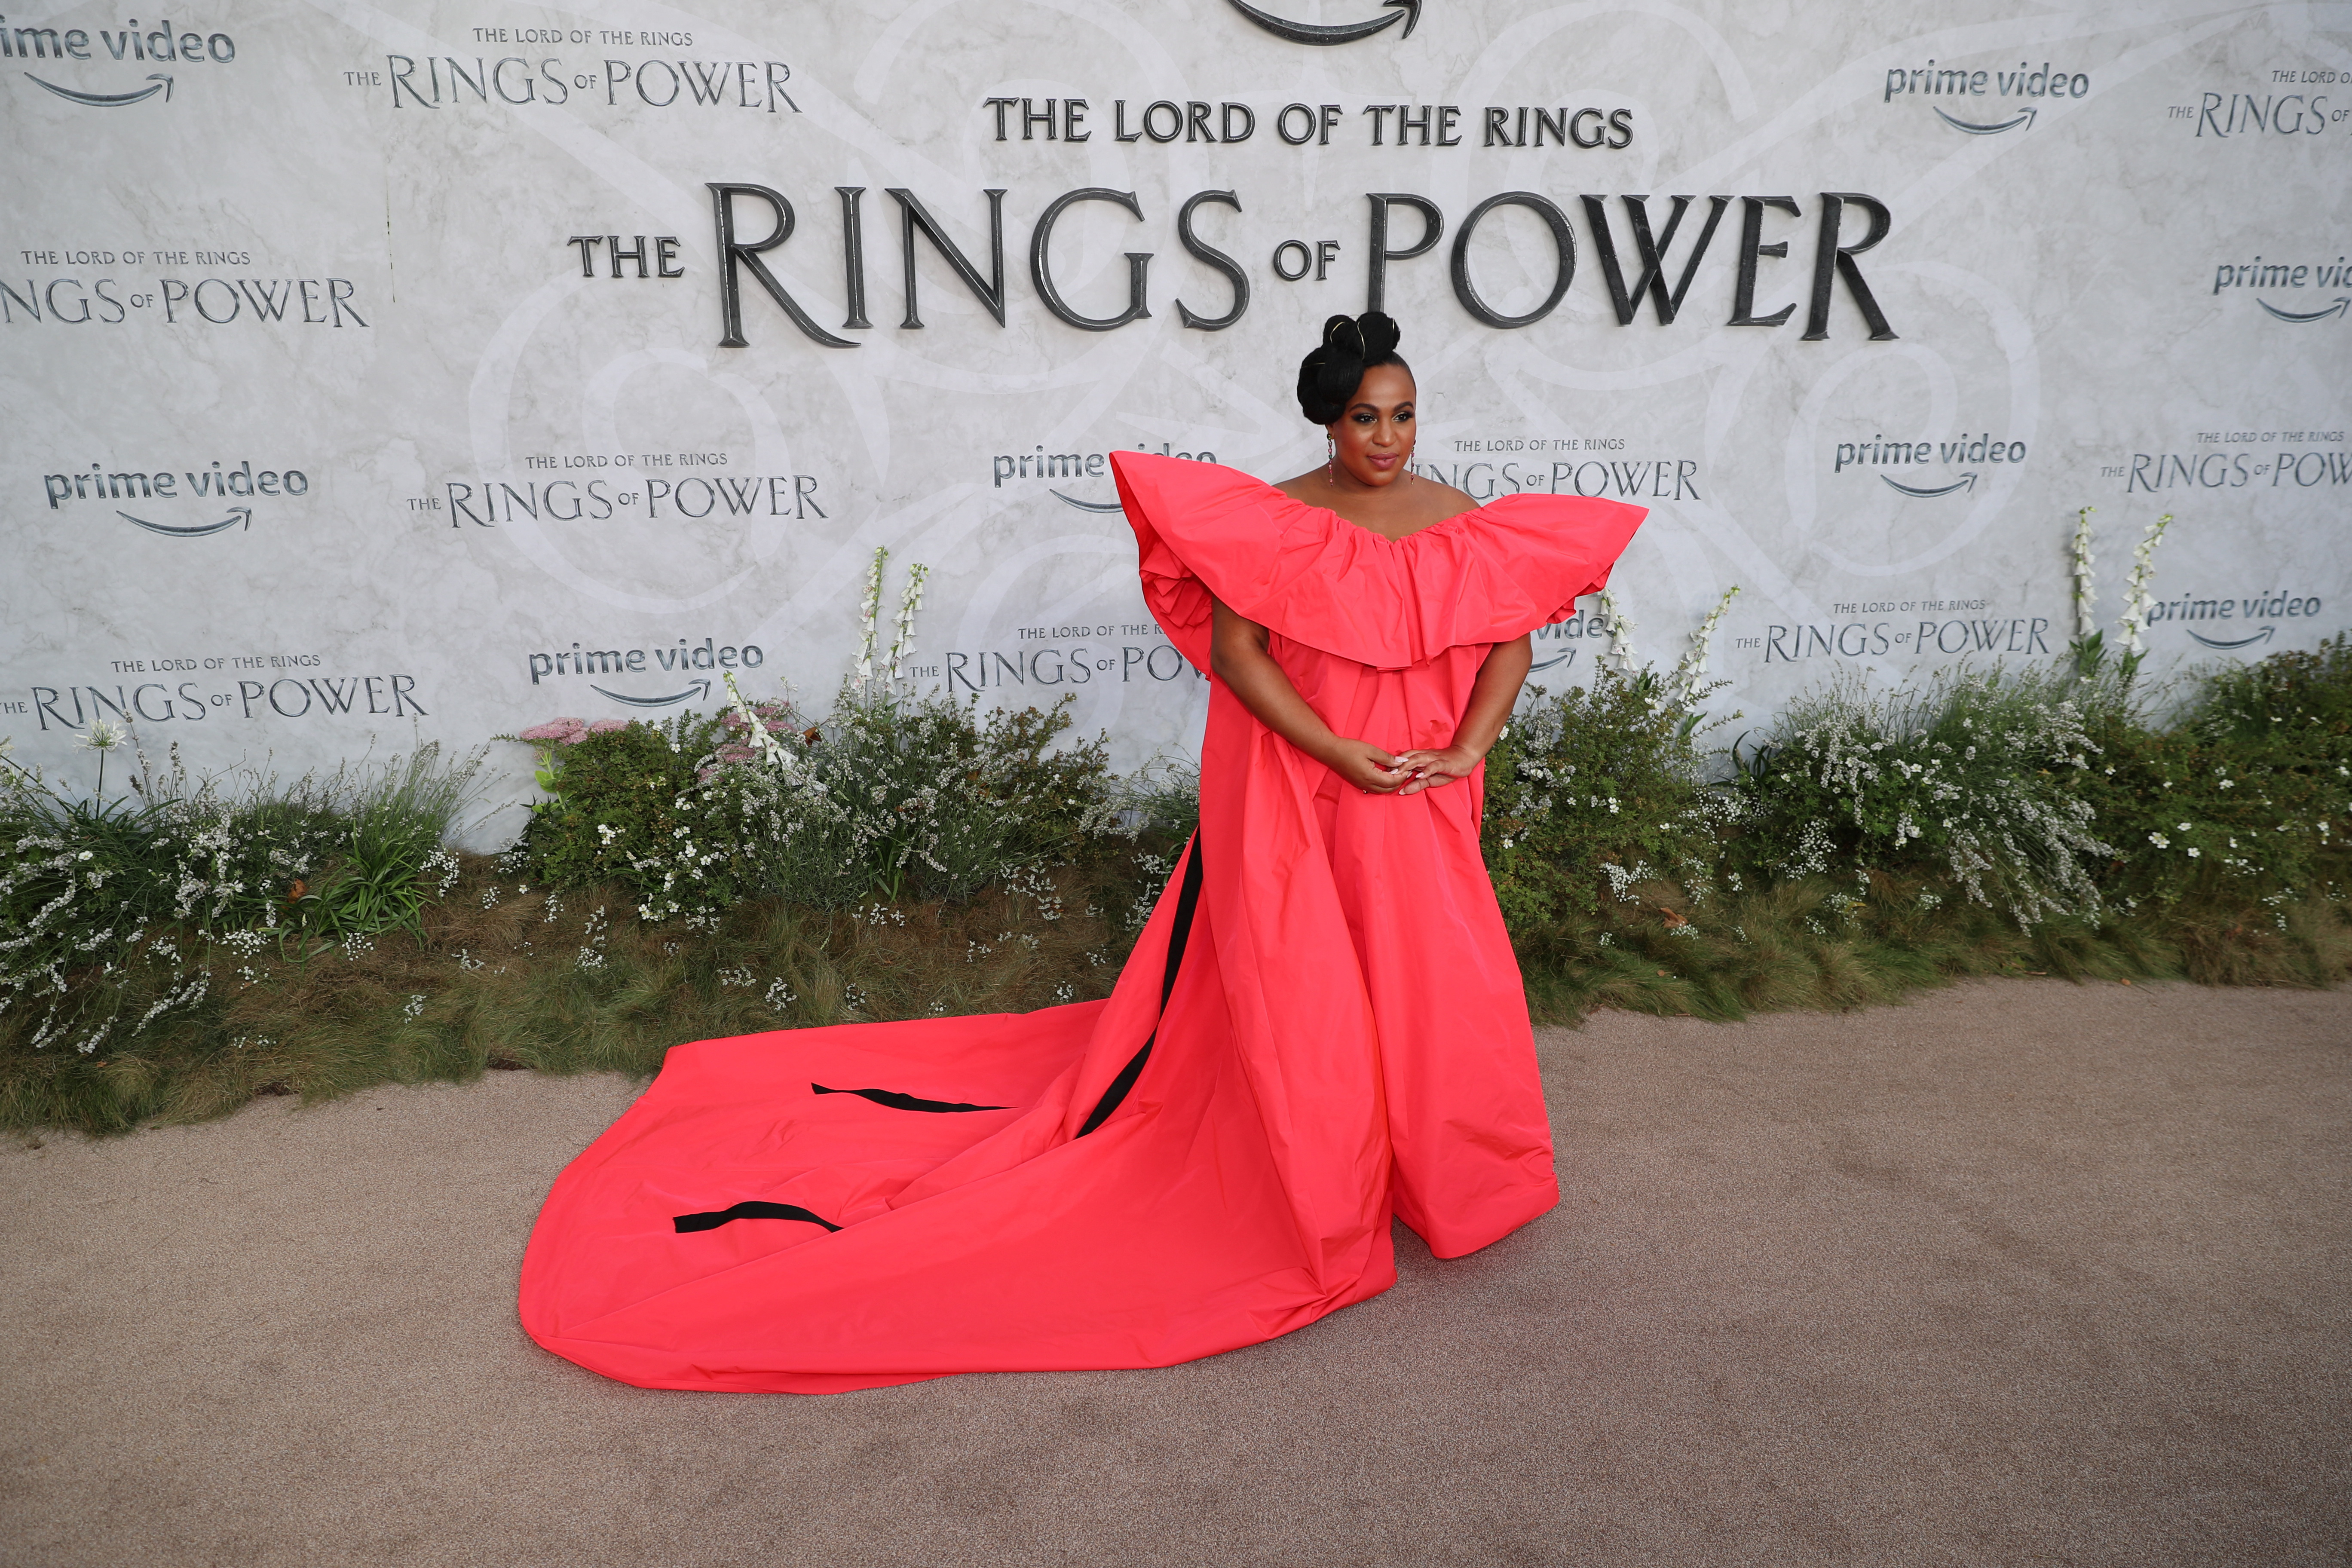 Rings of Power' calls out racism against cast members of color